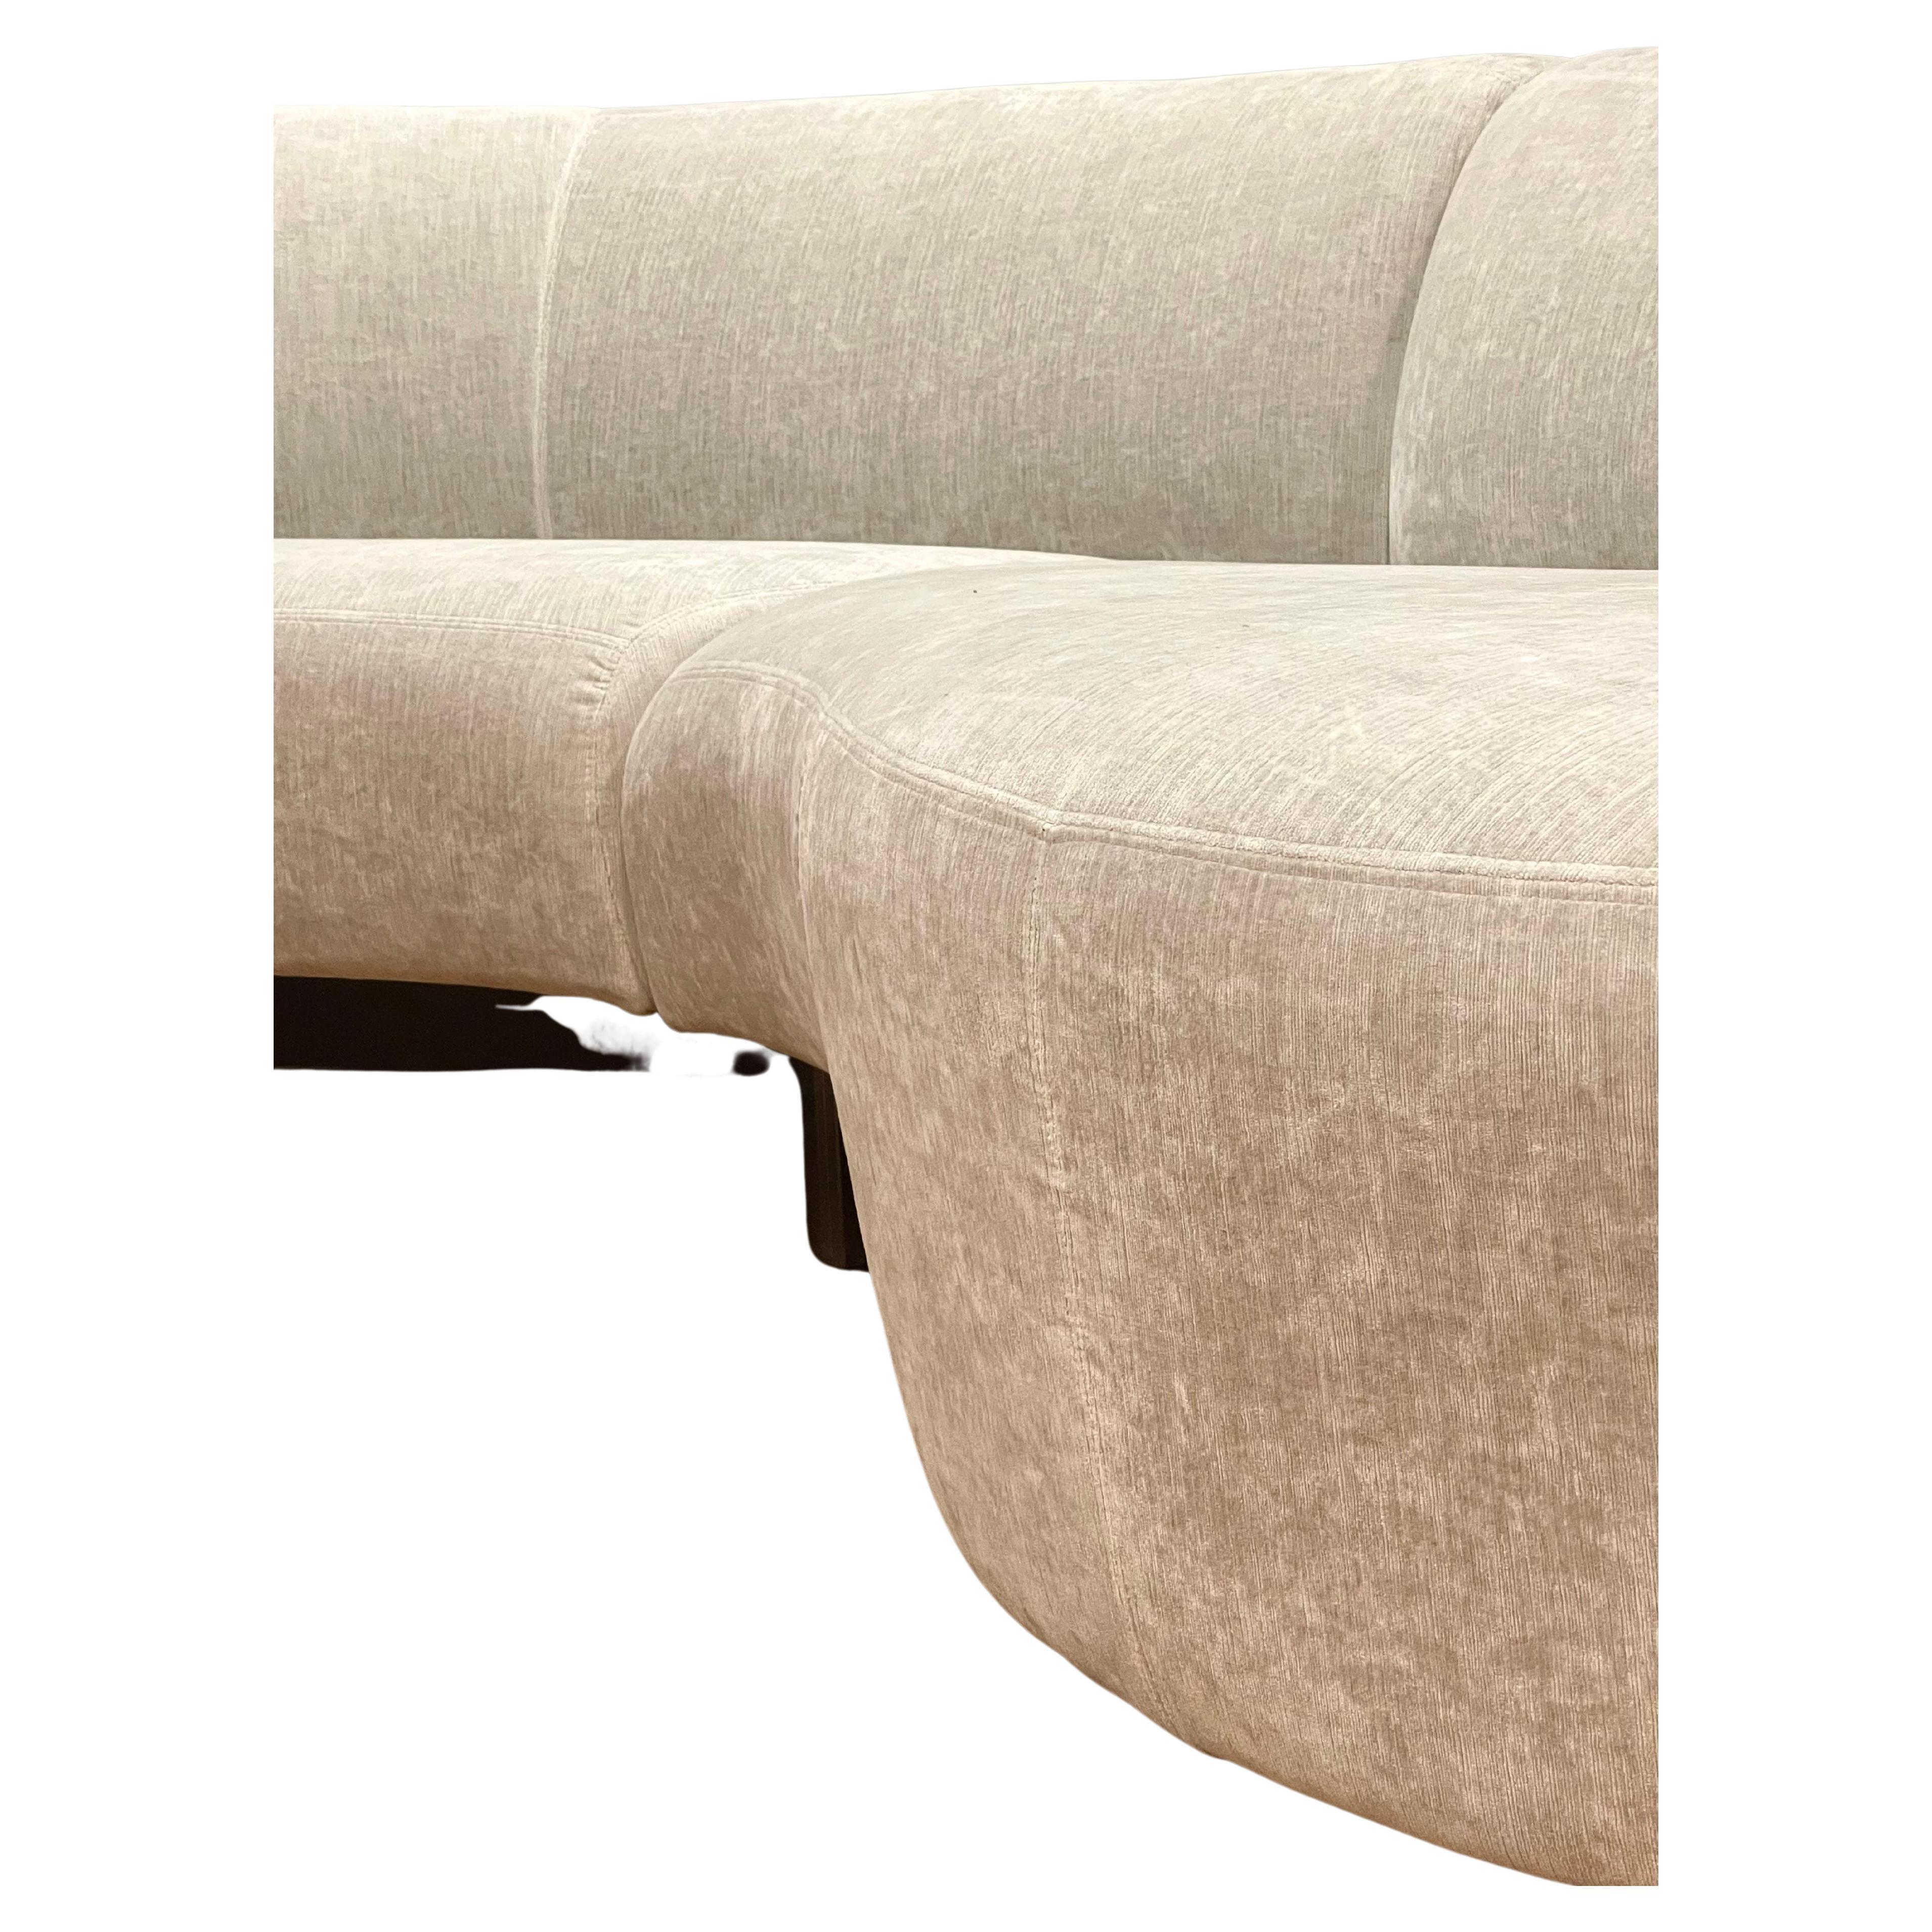 Robert Ebel “Allure” Sofa for Weiman/Preview curved 3 piece sectional with lucite legs in a gray chenille. Pieces connect via metal bracket. Tagged to underside and in excellent condition.